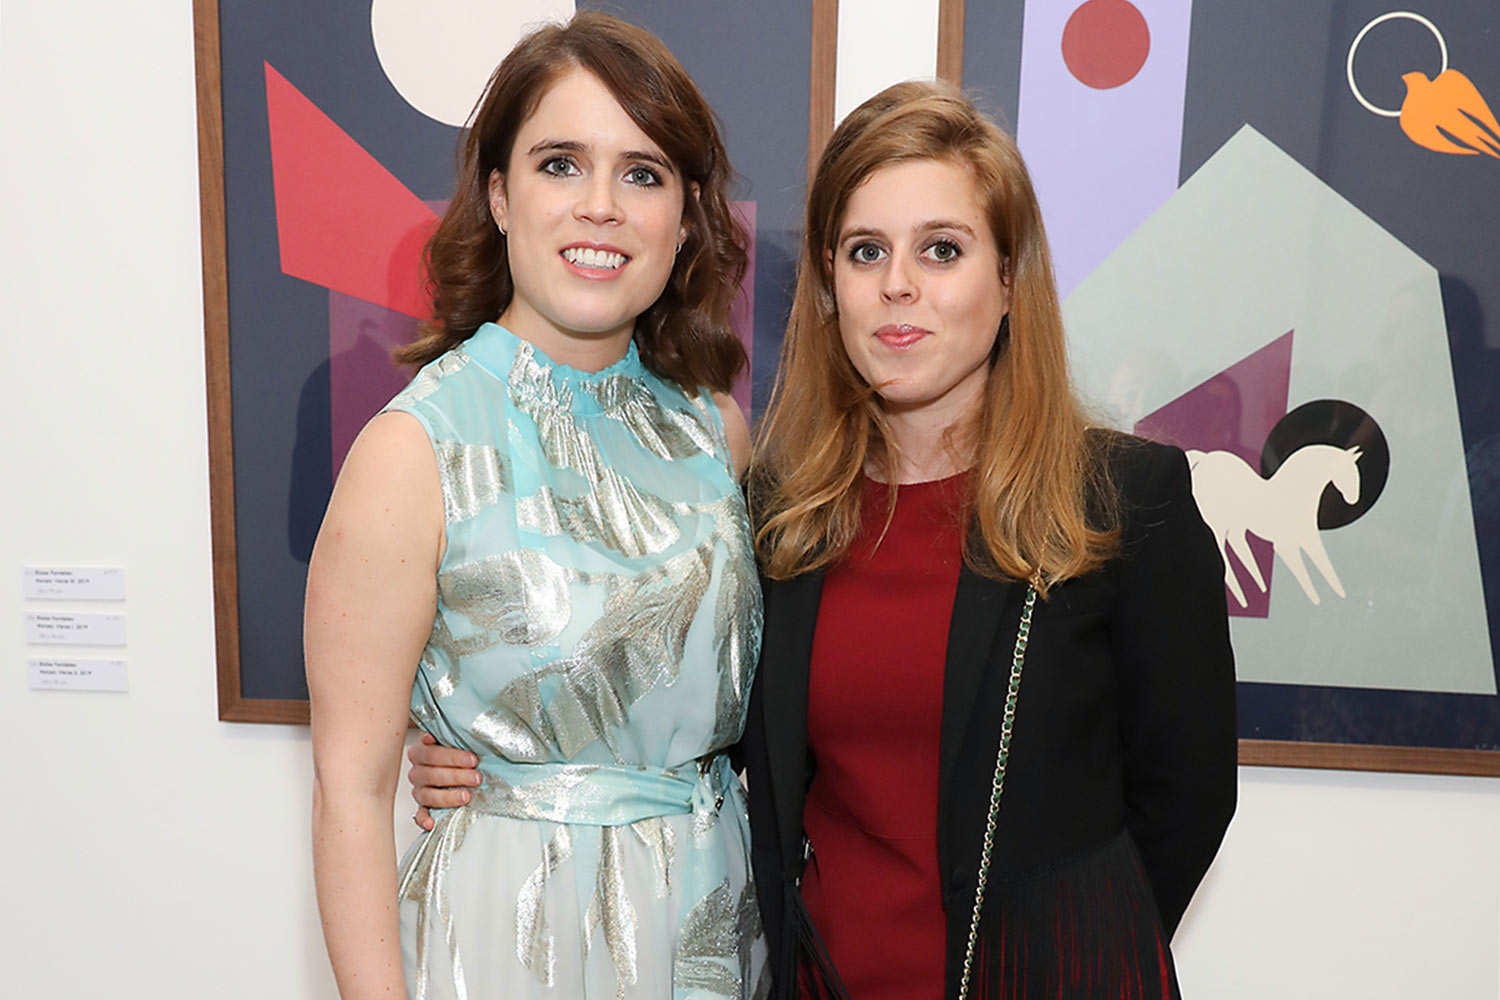 Princess Beatrice Birth of Baby Girl! Princess Eugenie Congratulates with Instagram Message